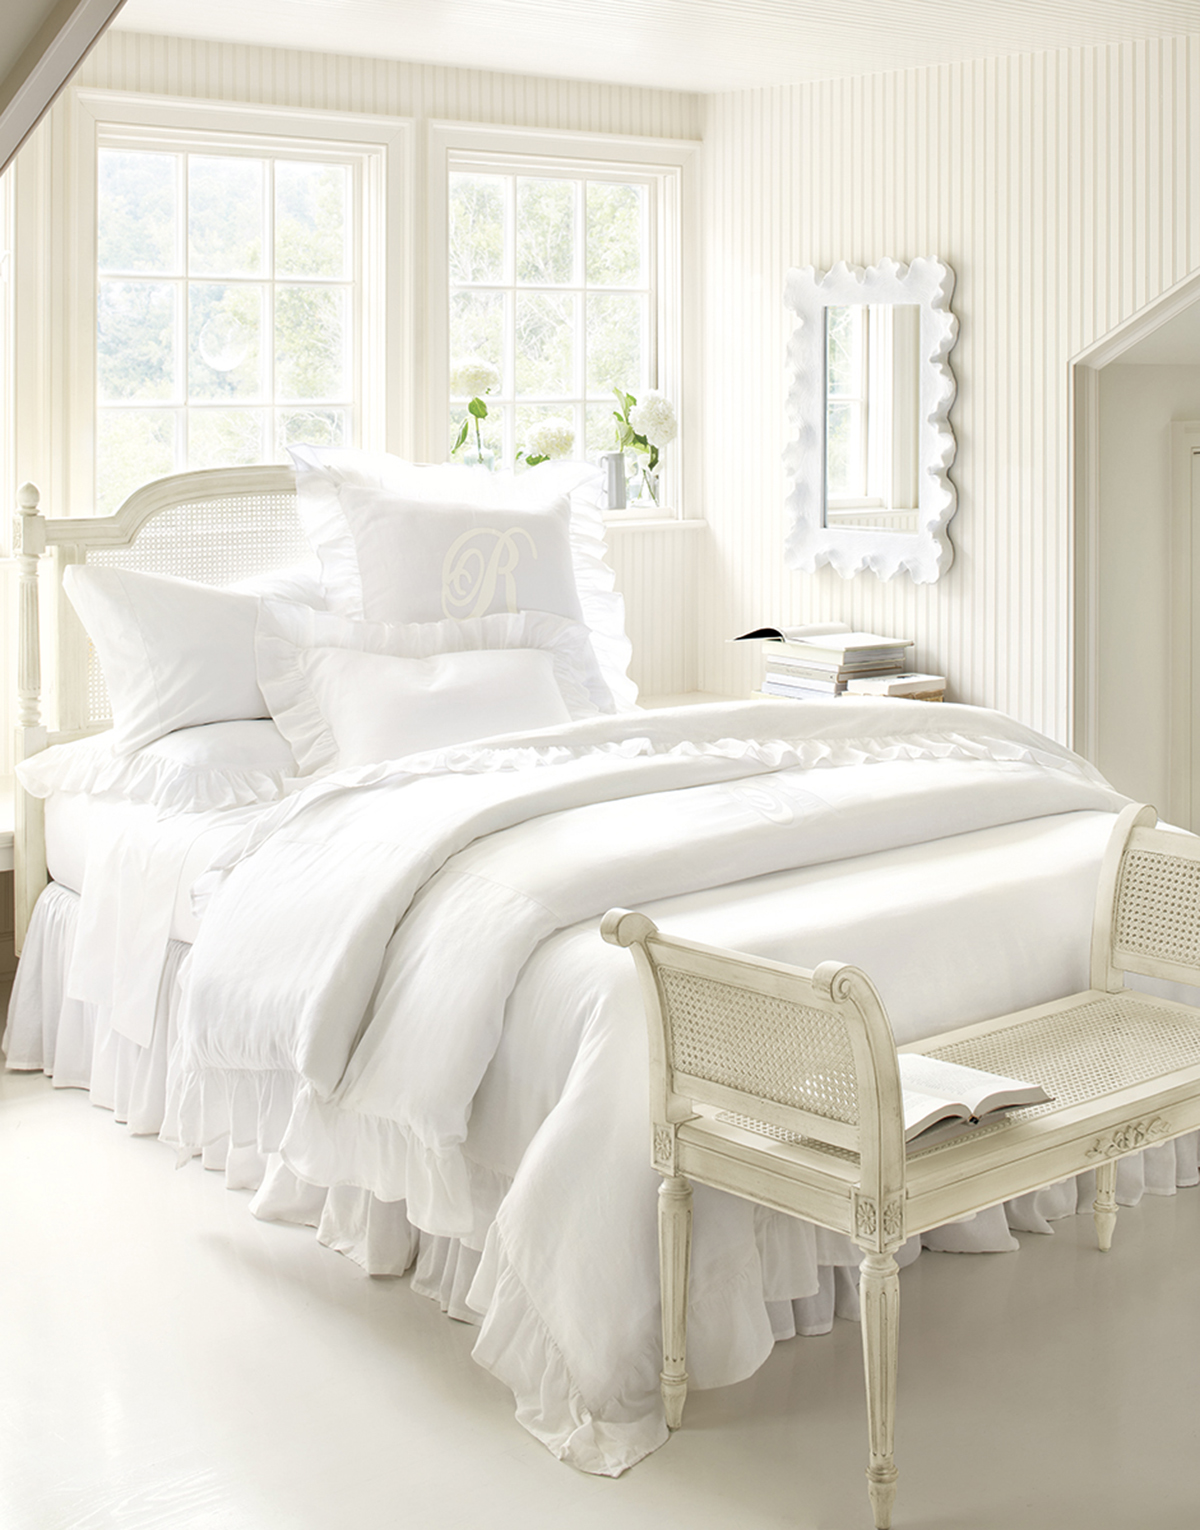 How to Decorate an All White Bedroom